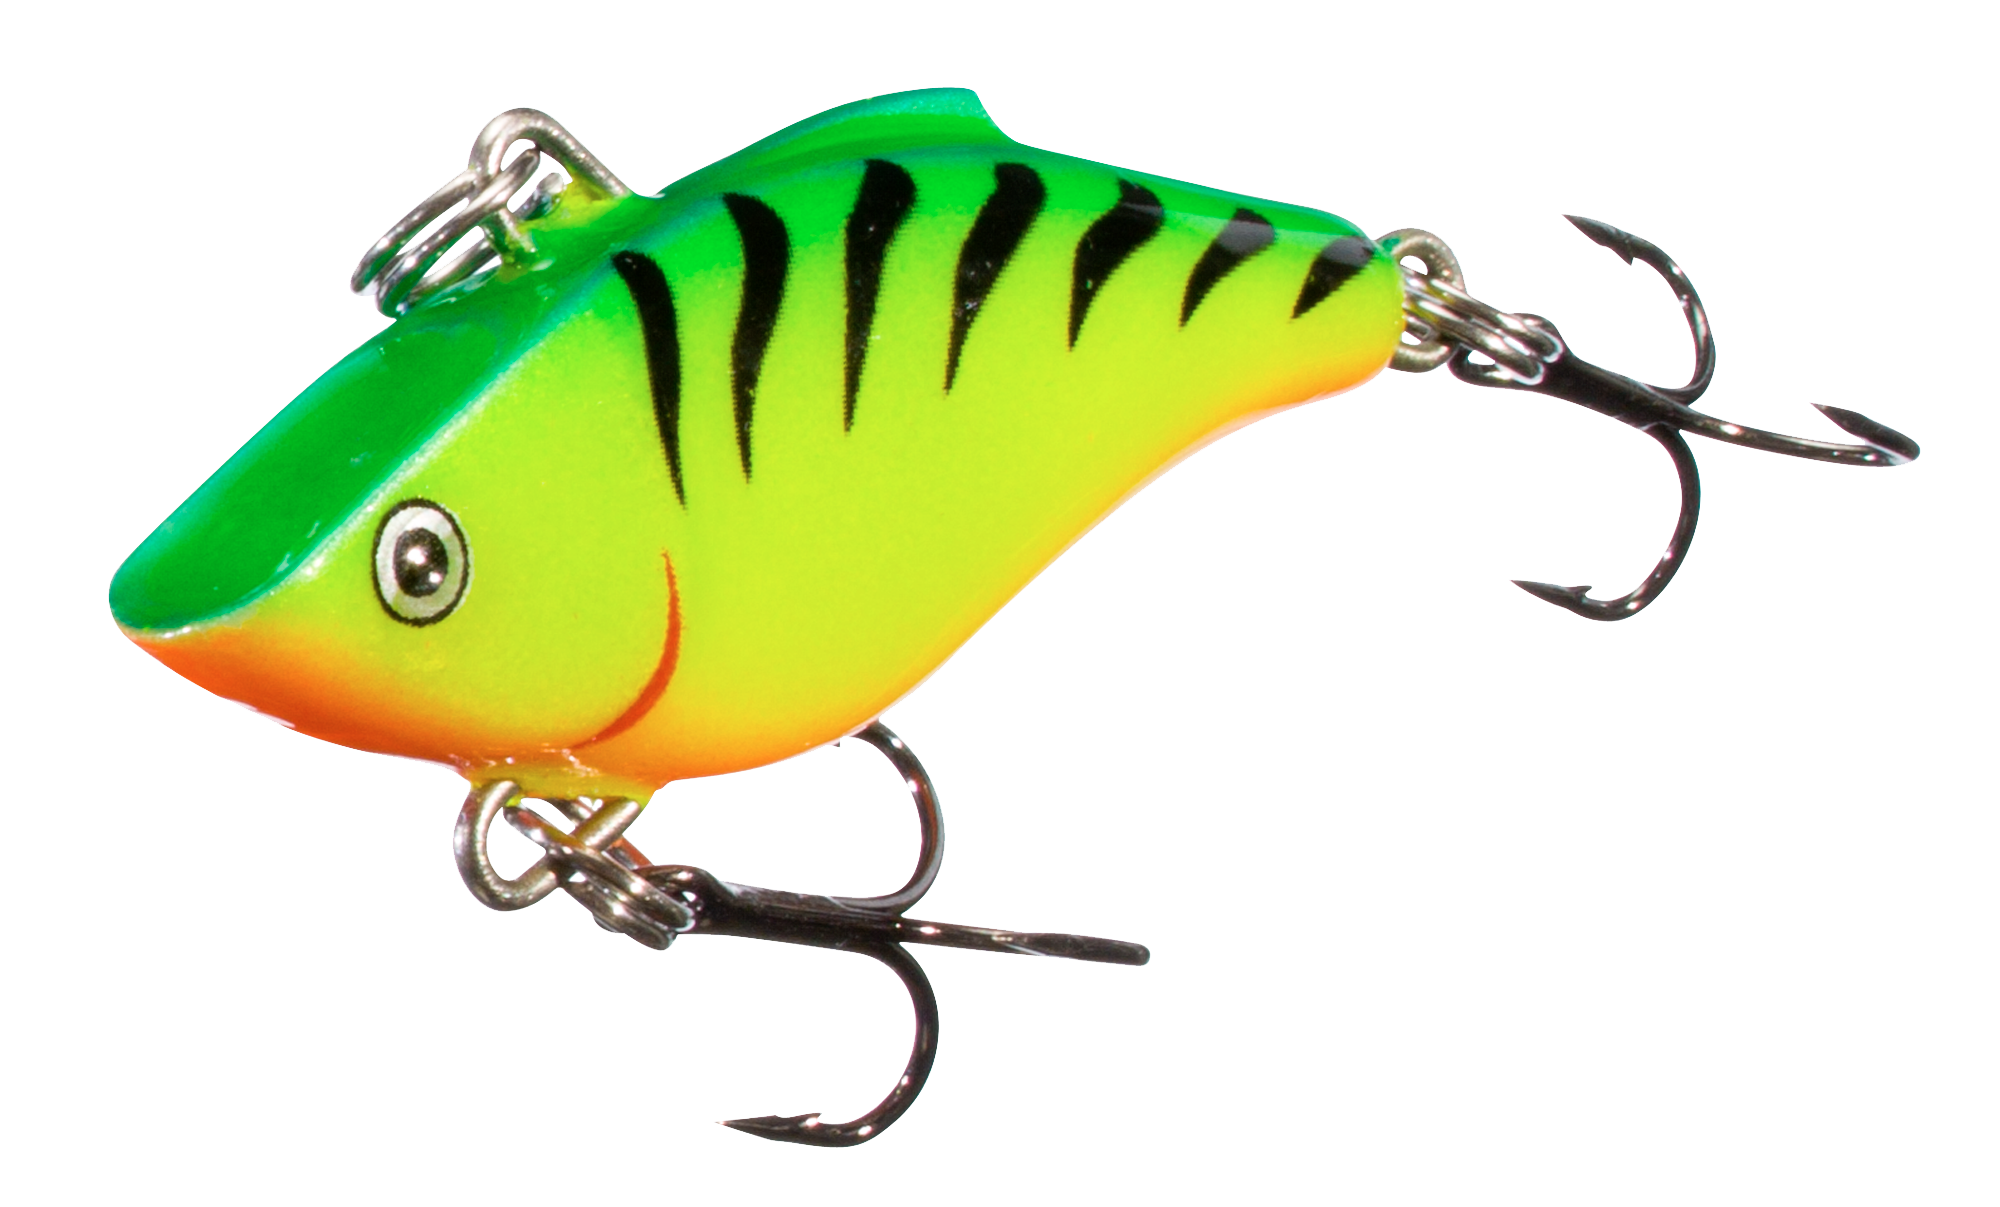  Rapala Rattlin 05 Fishing lure (Firetiger, Size- 2) : Fishing  Topwater Lures And Crankbaits : Sports & Outdoors